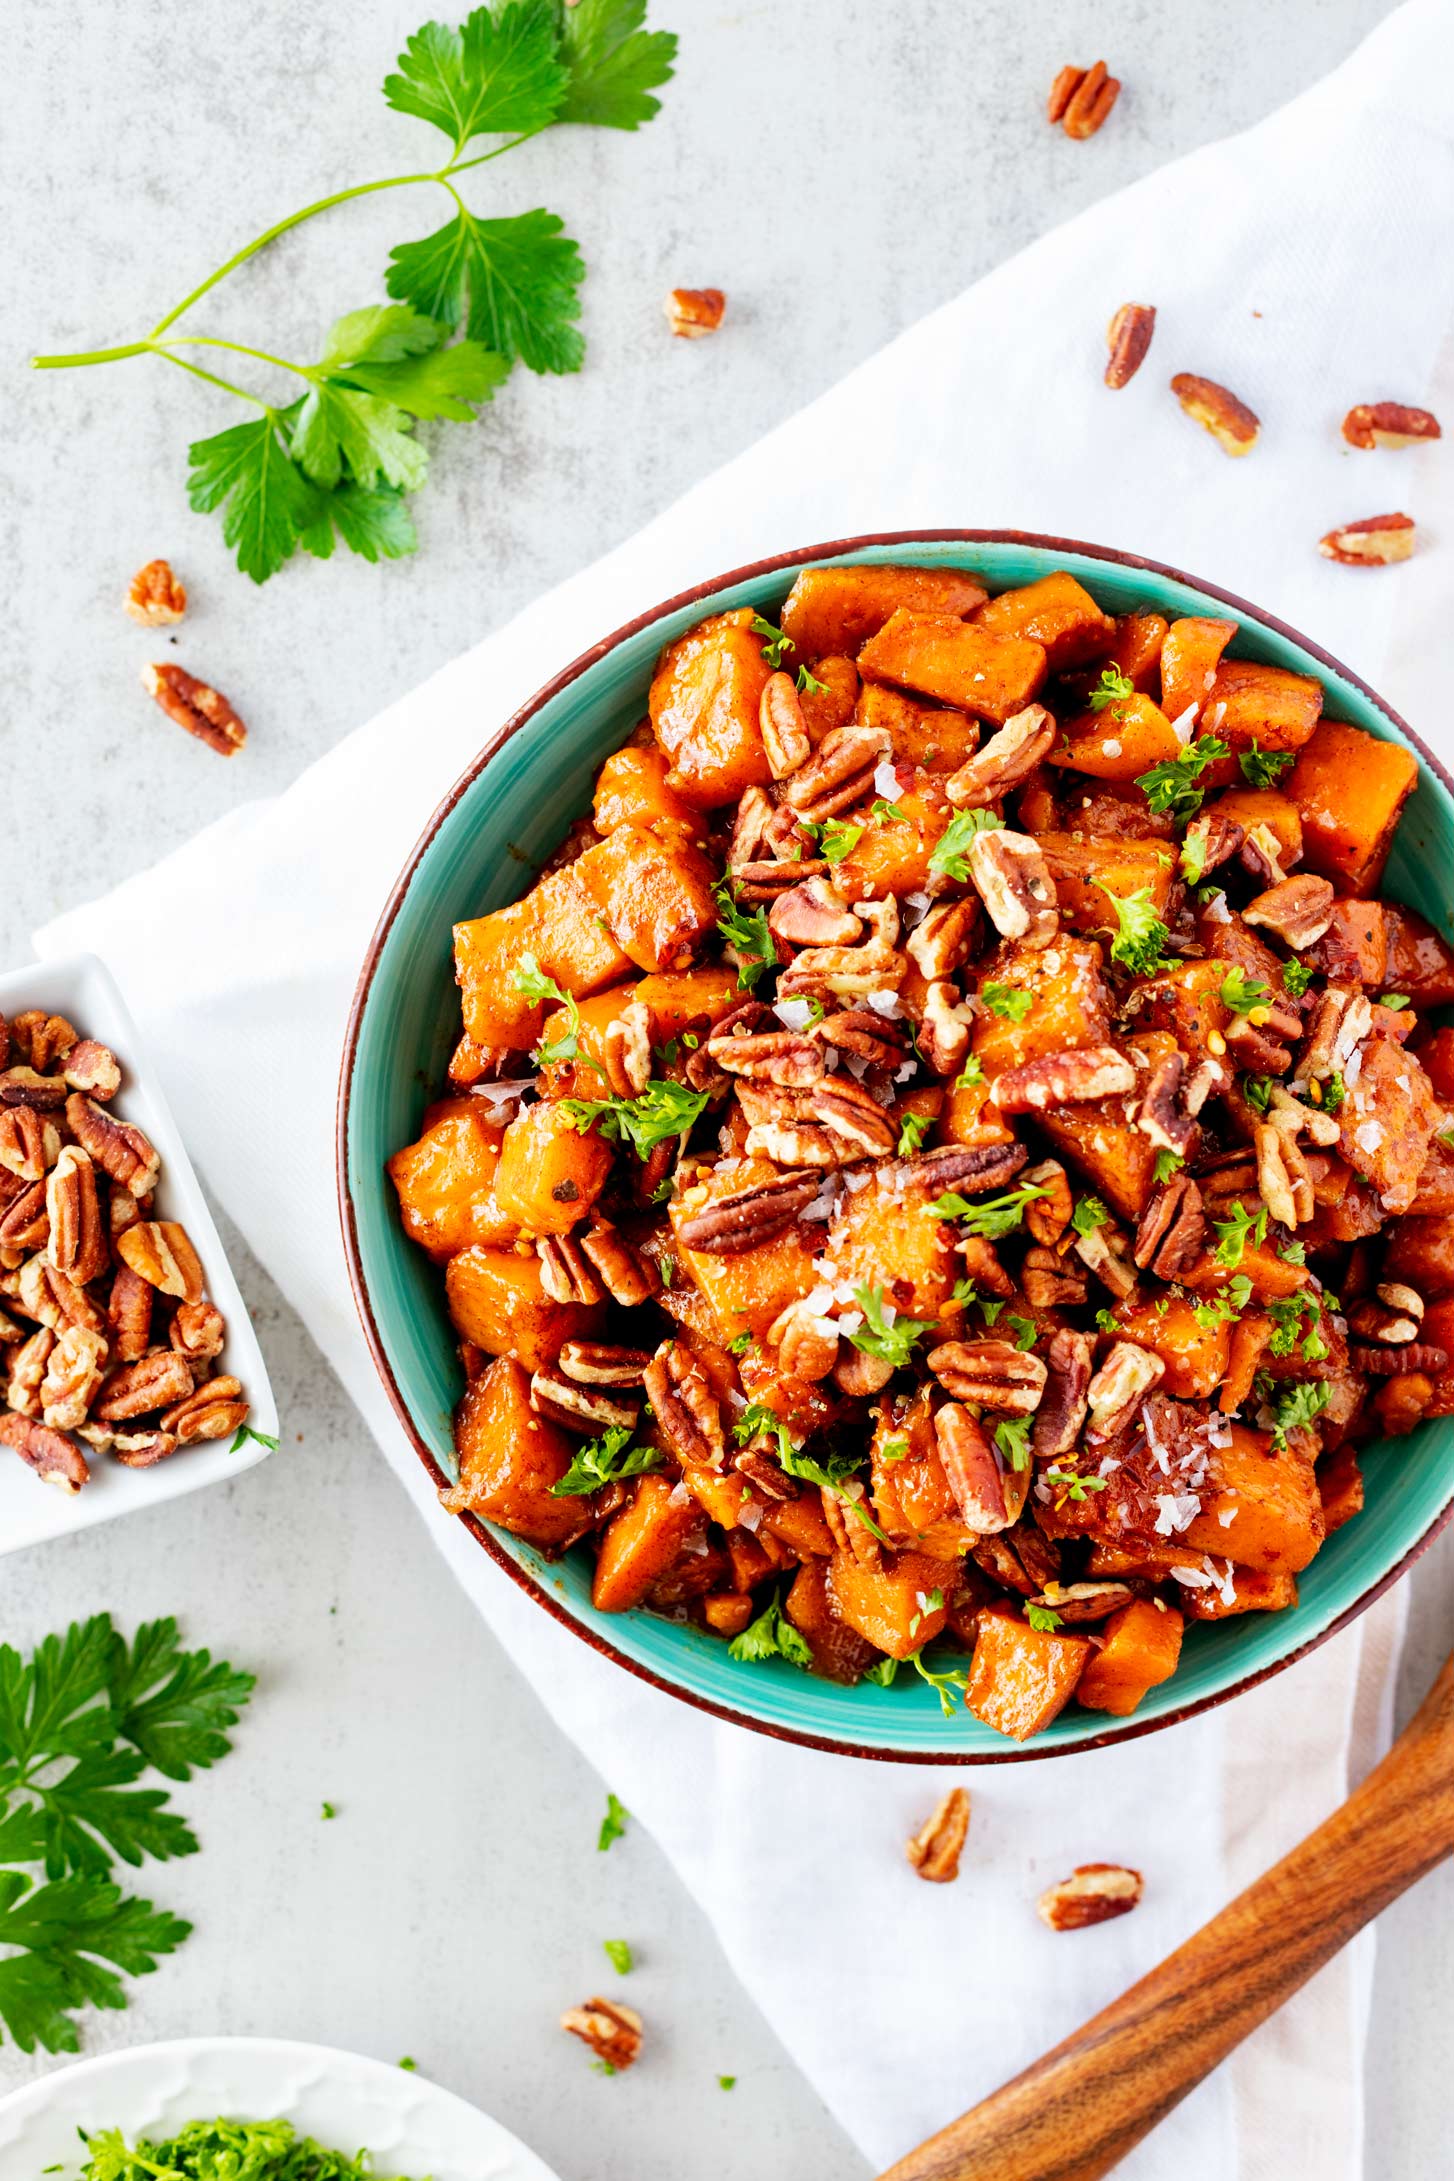 Overhead photo of a teal bowl of slow cooker sweet potatoes sitting on a white napkin and garnished with parsley and pecans.